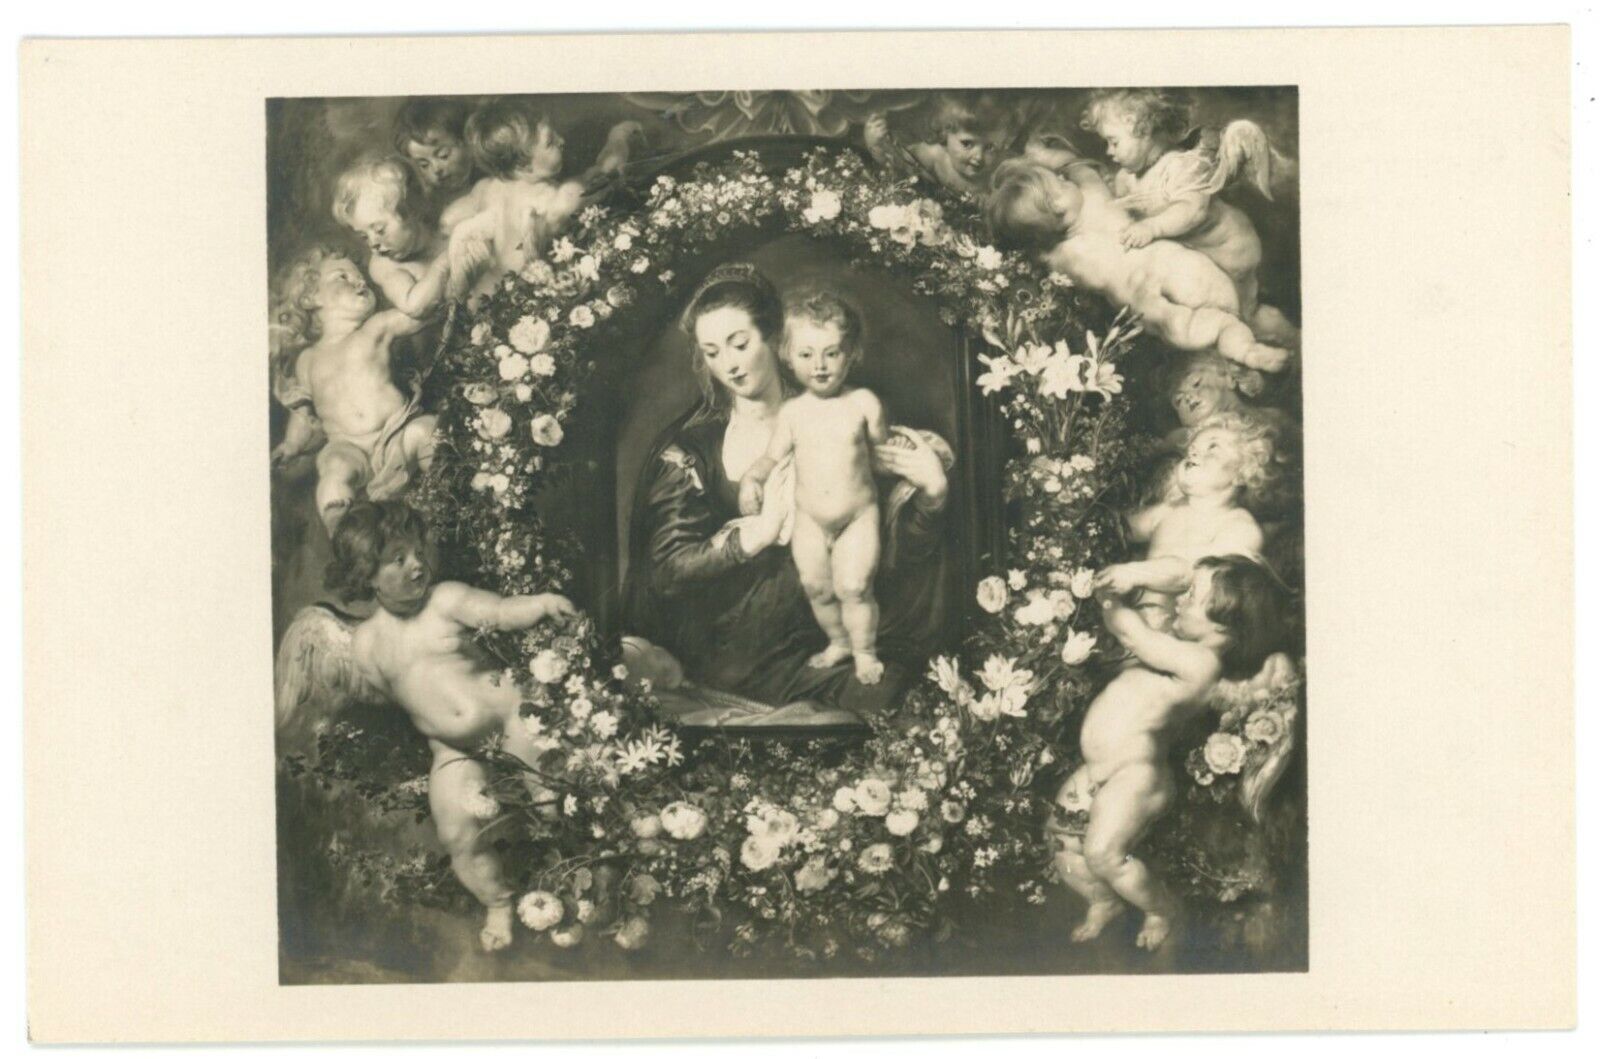 Madonna In Floral Wreath By Flemish Painter Peter Paul Rubens In 1620 Postcard